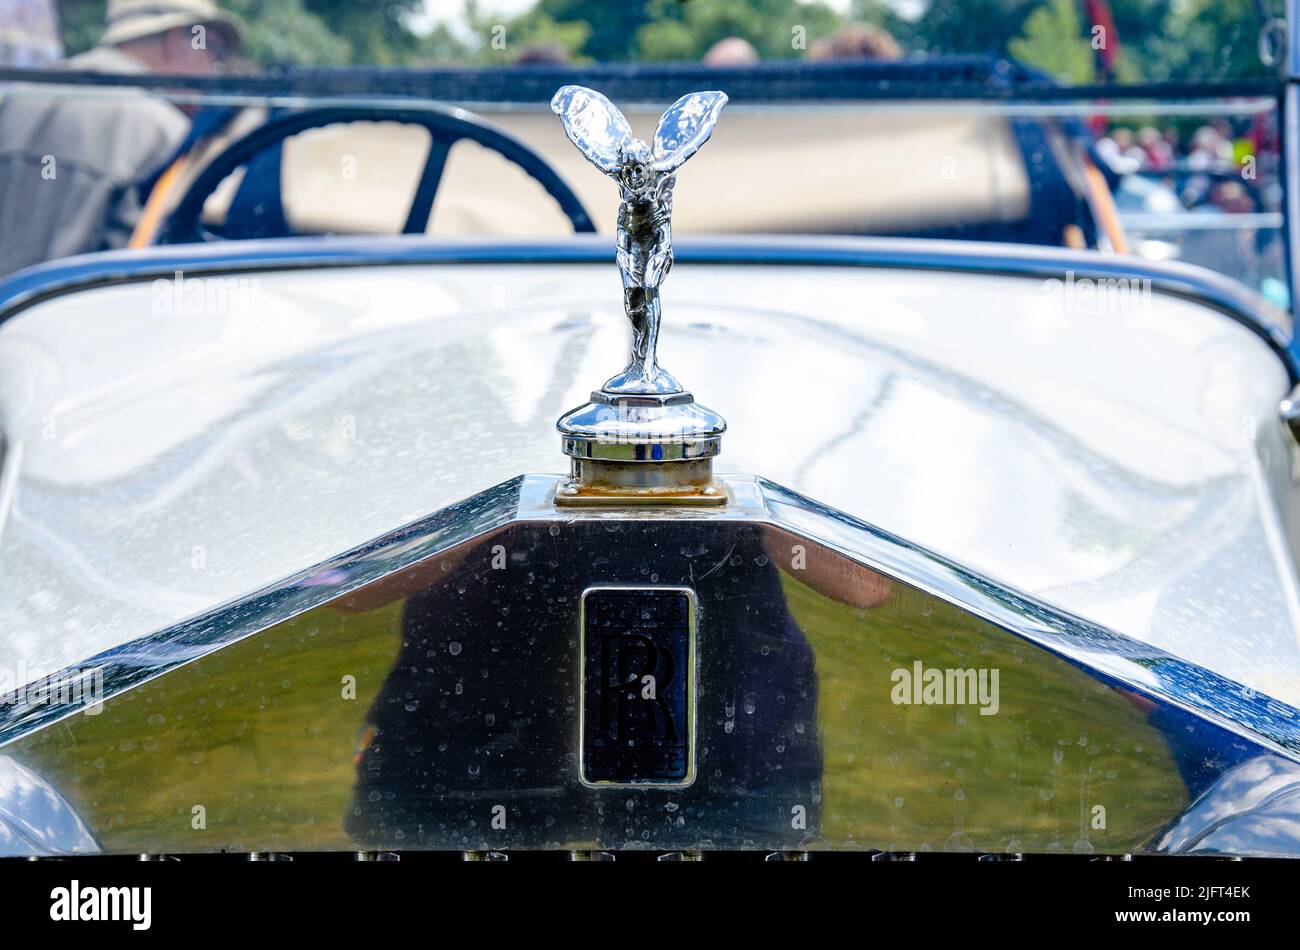 The 'Spirit of Ecstasy' figurehead on the front of a white 20/25 Rolls Royce at The Berkshire Motor Show in Reading, UK Stock Photo